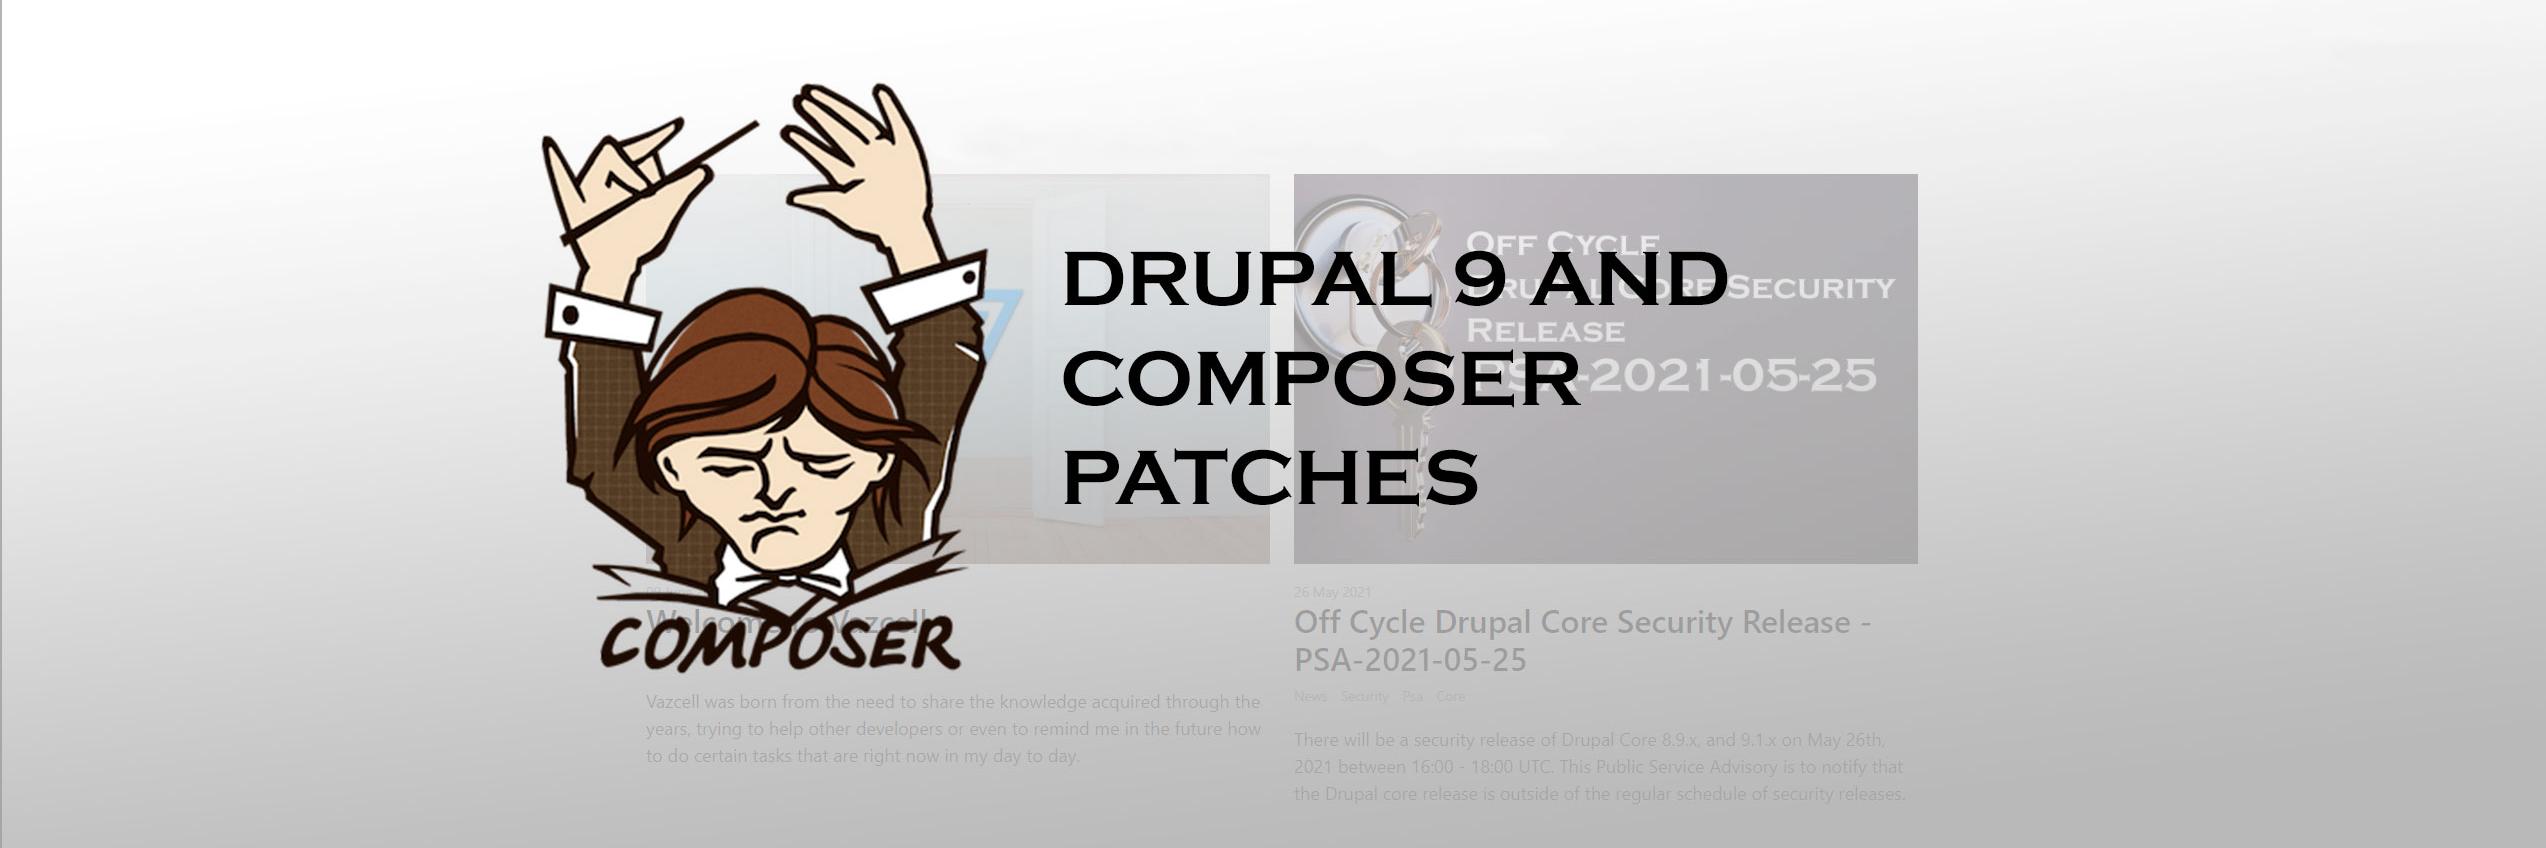 Drupal 9 and composer patches